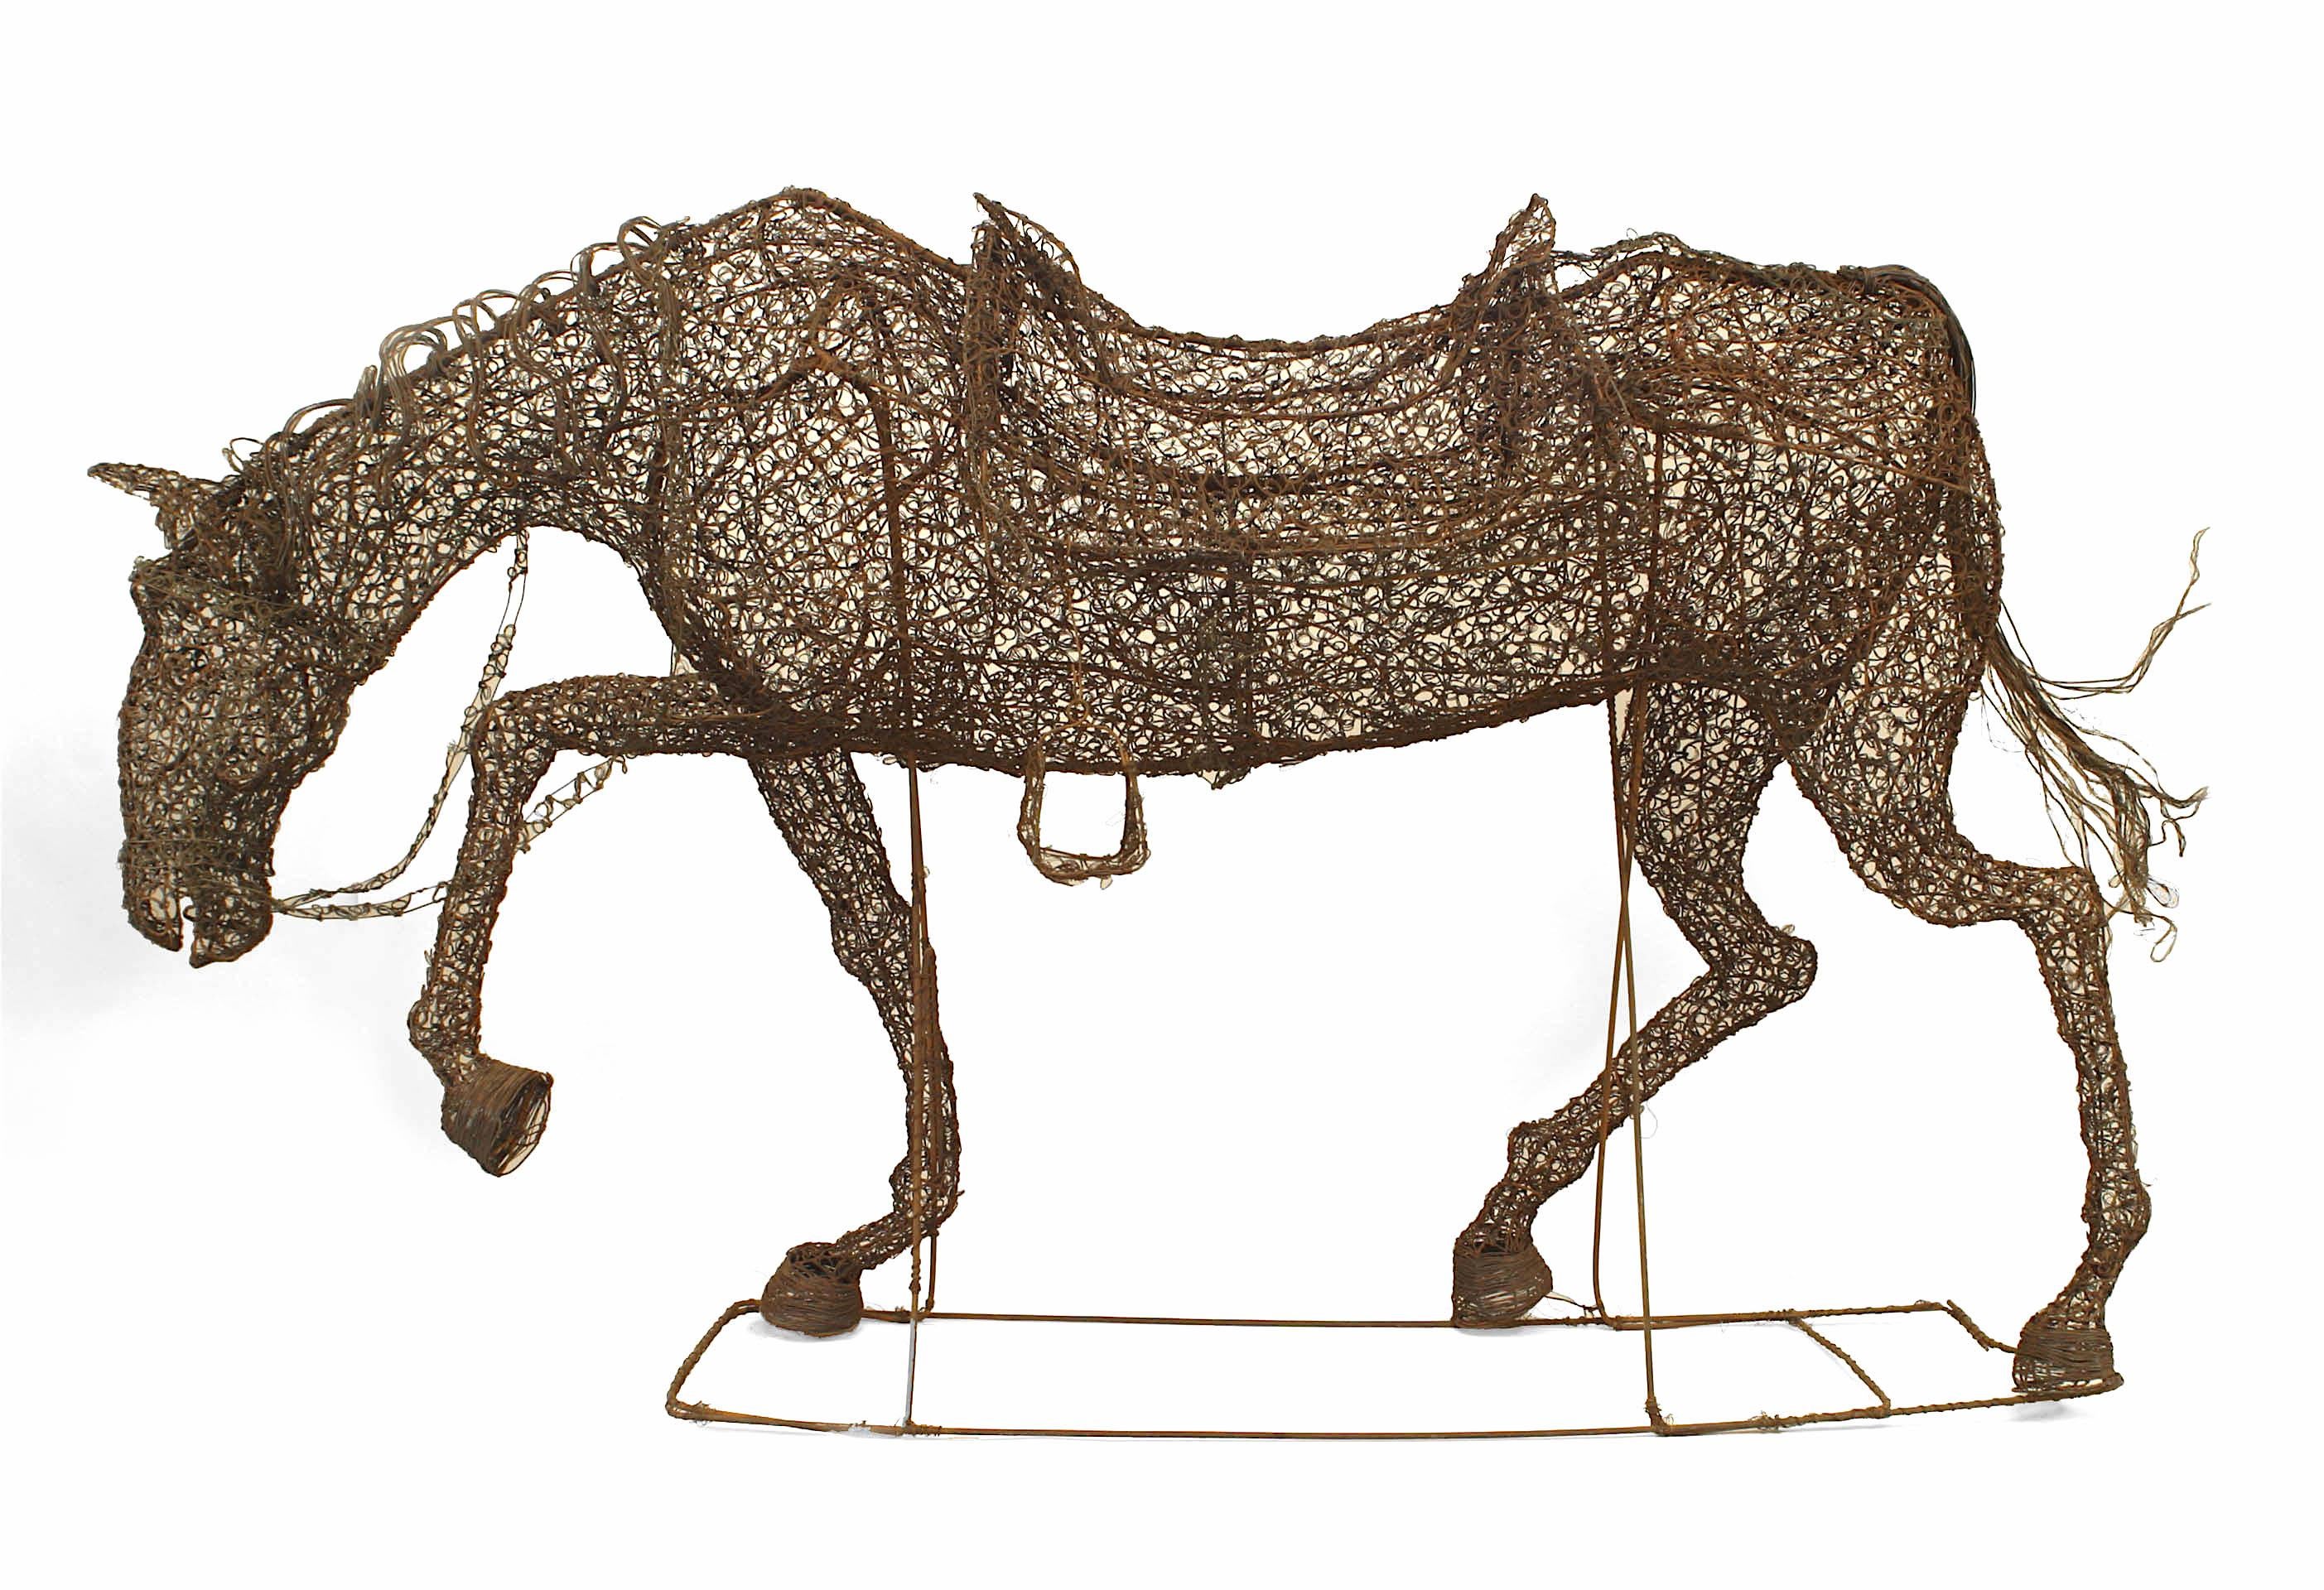 Spanish life size wire figure of Don Quixote on horse (19/20th Cent)
